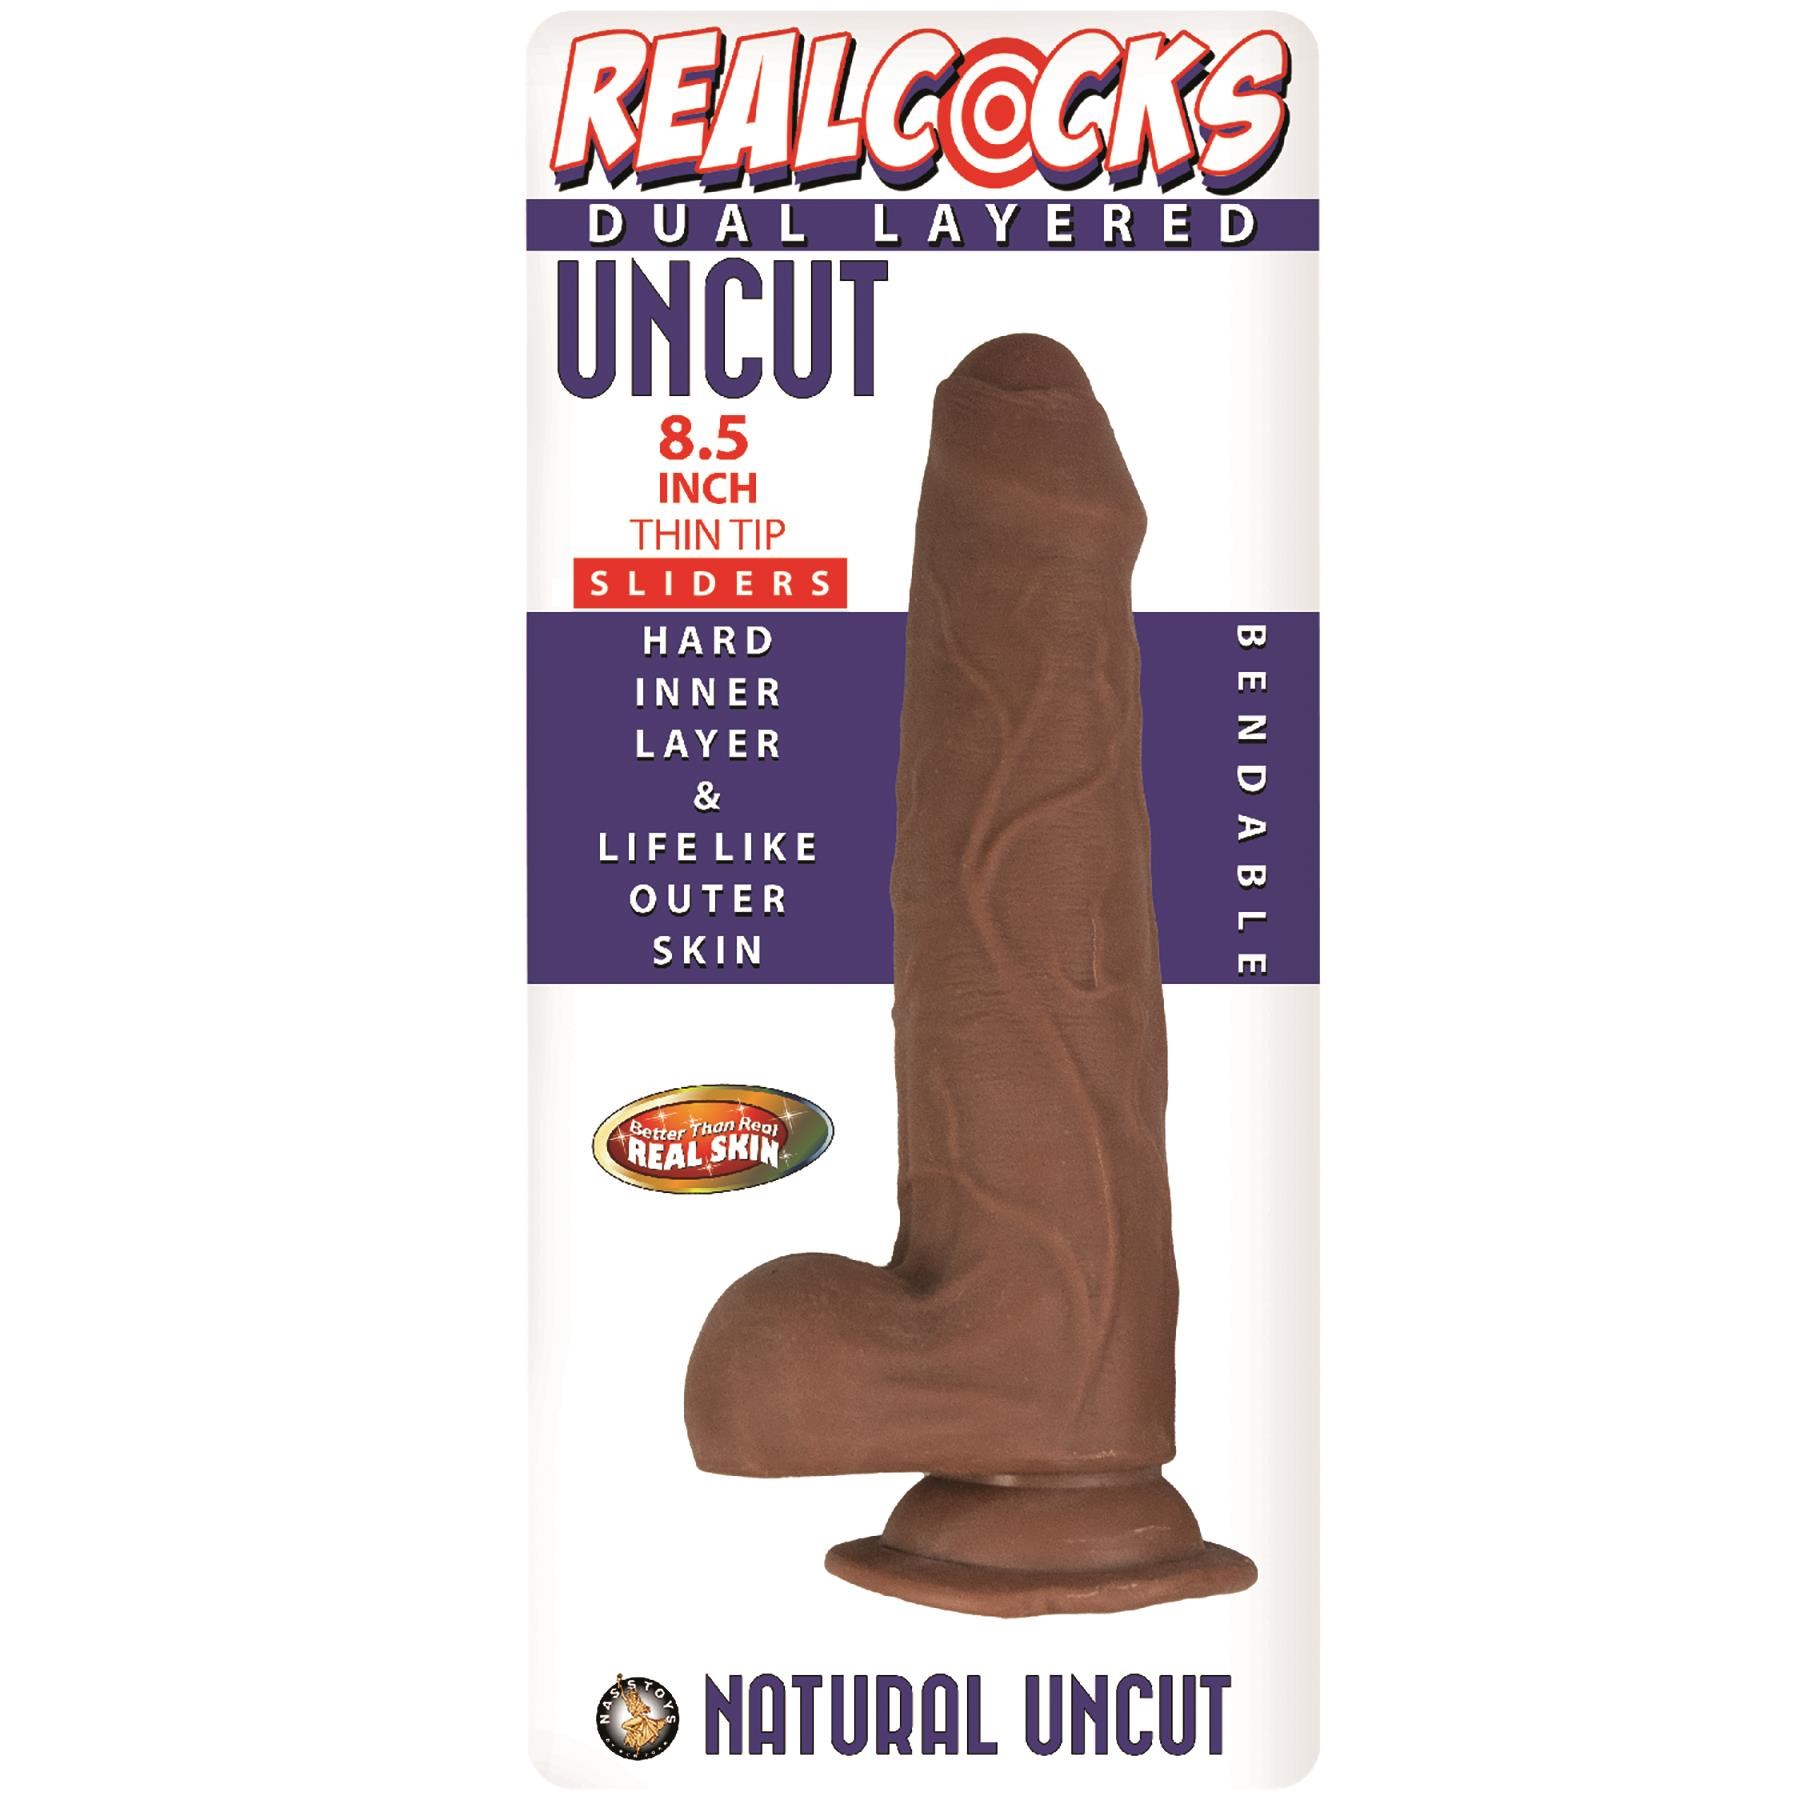 Realcocks 8.5 Inch Thin Tip Dual Layered Uncut Sliders Dildo - Packaging - Brown